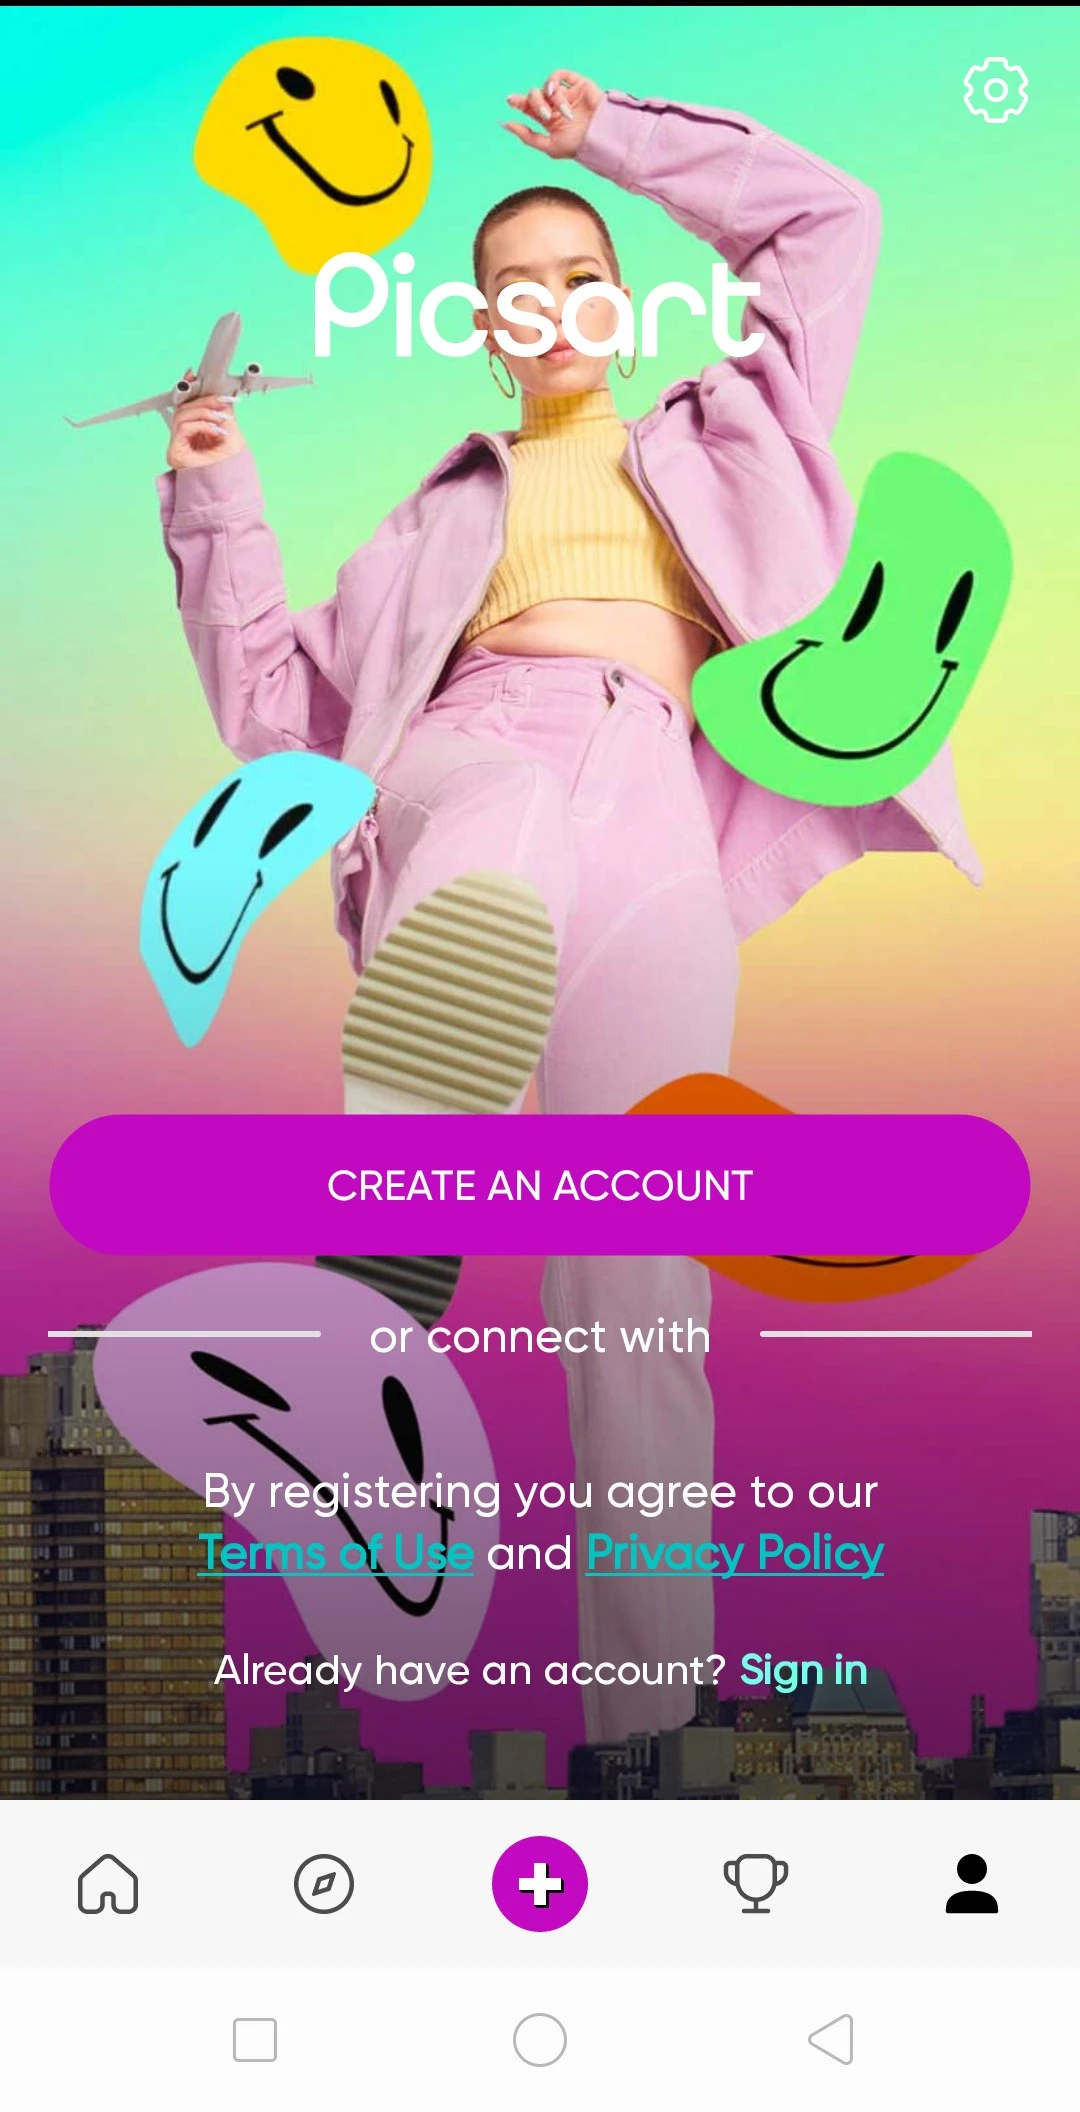 Account creation guide to the Picsart app 